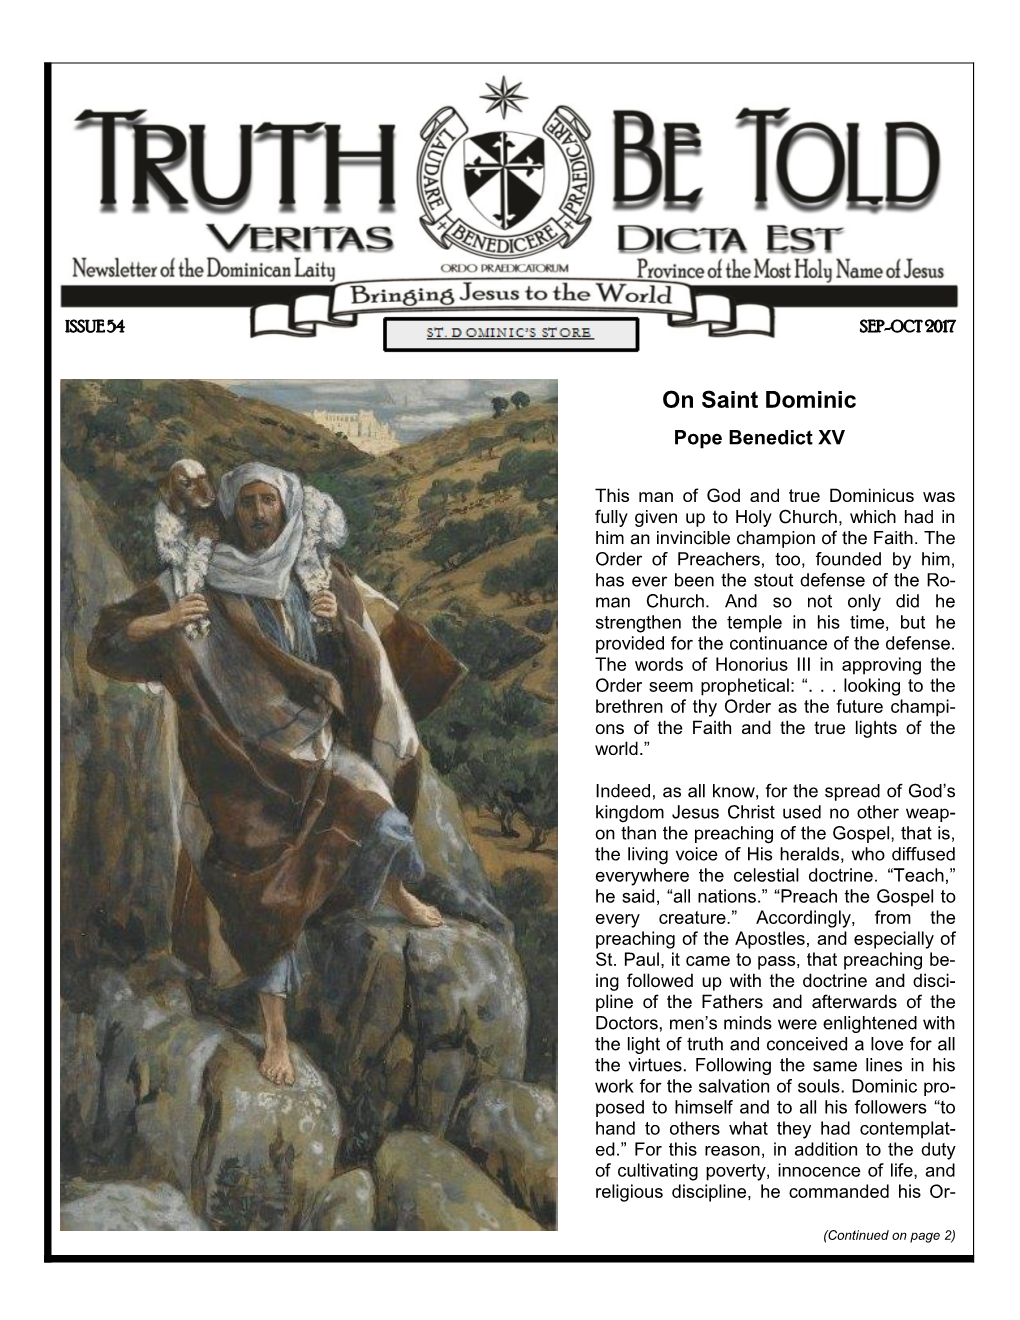 Truth Be Told 54 Page 2 Sep-Oct 2017